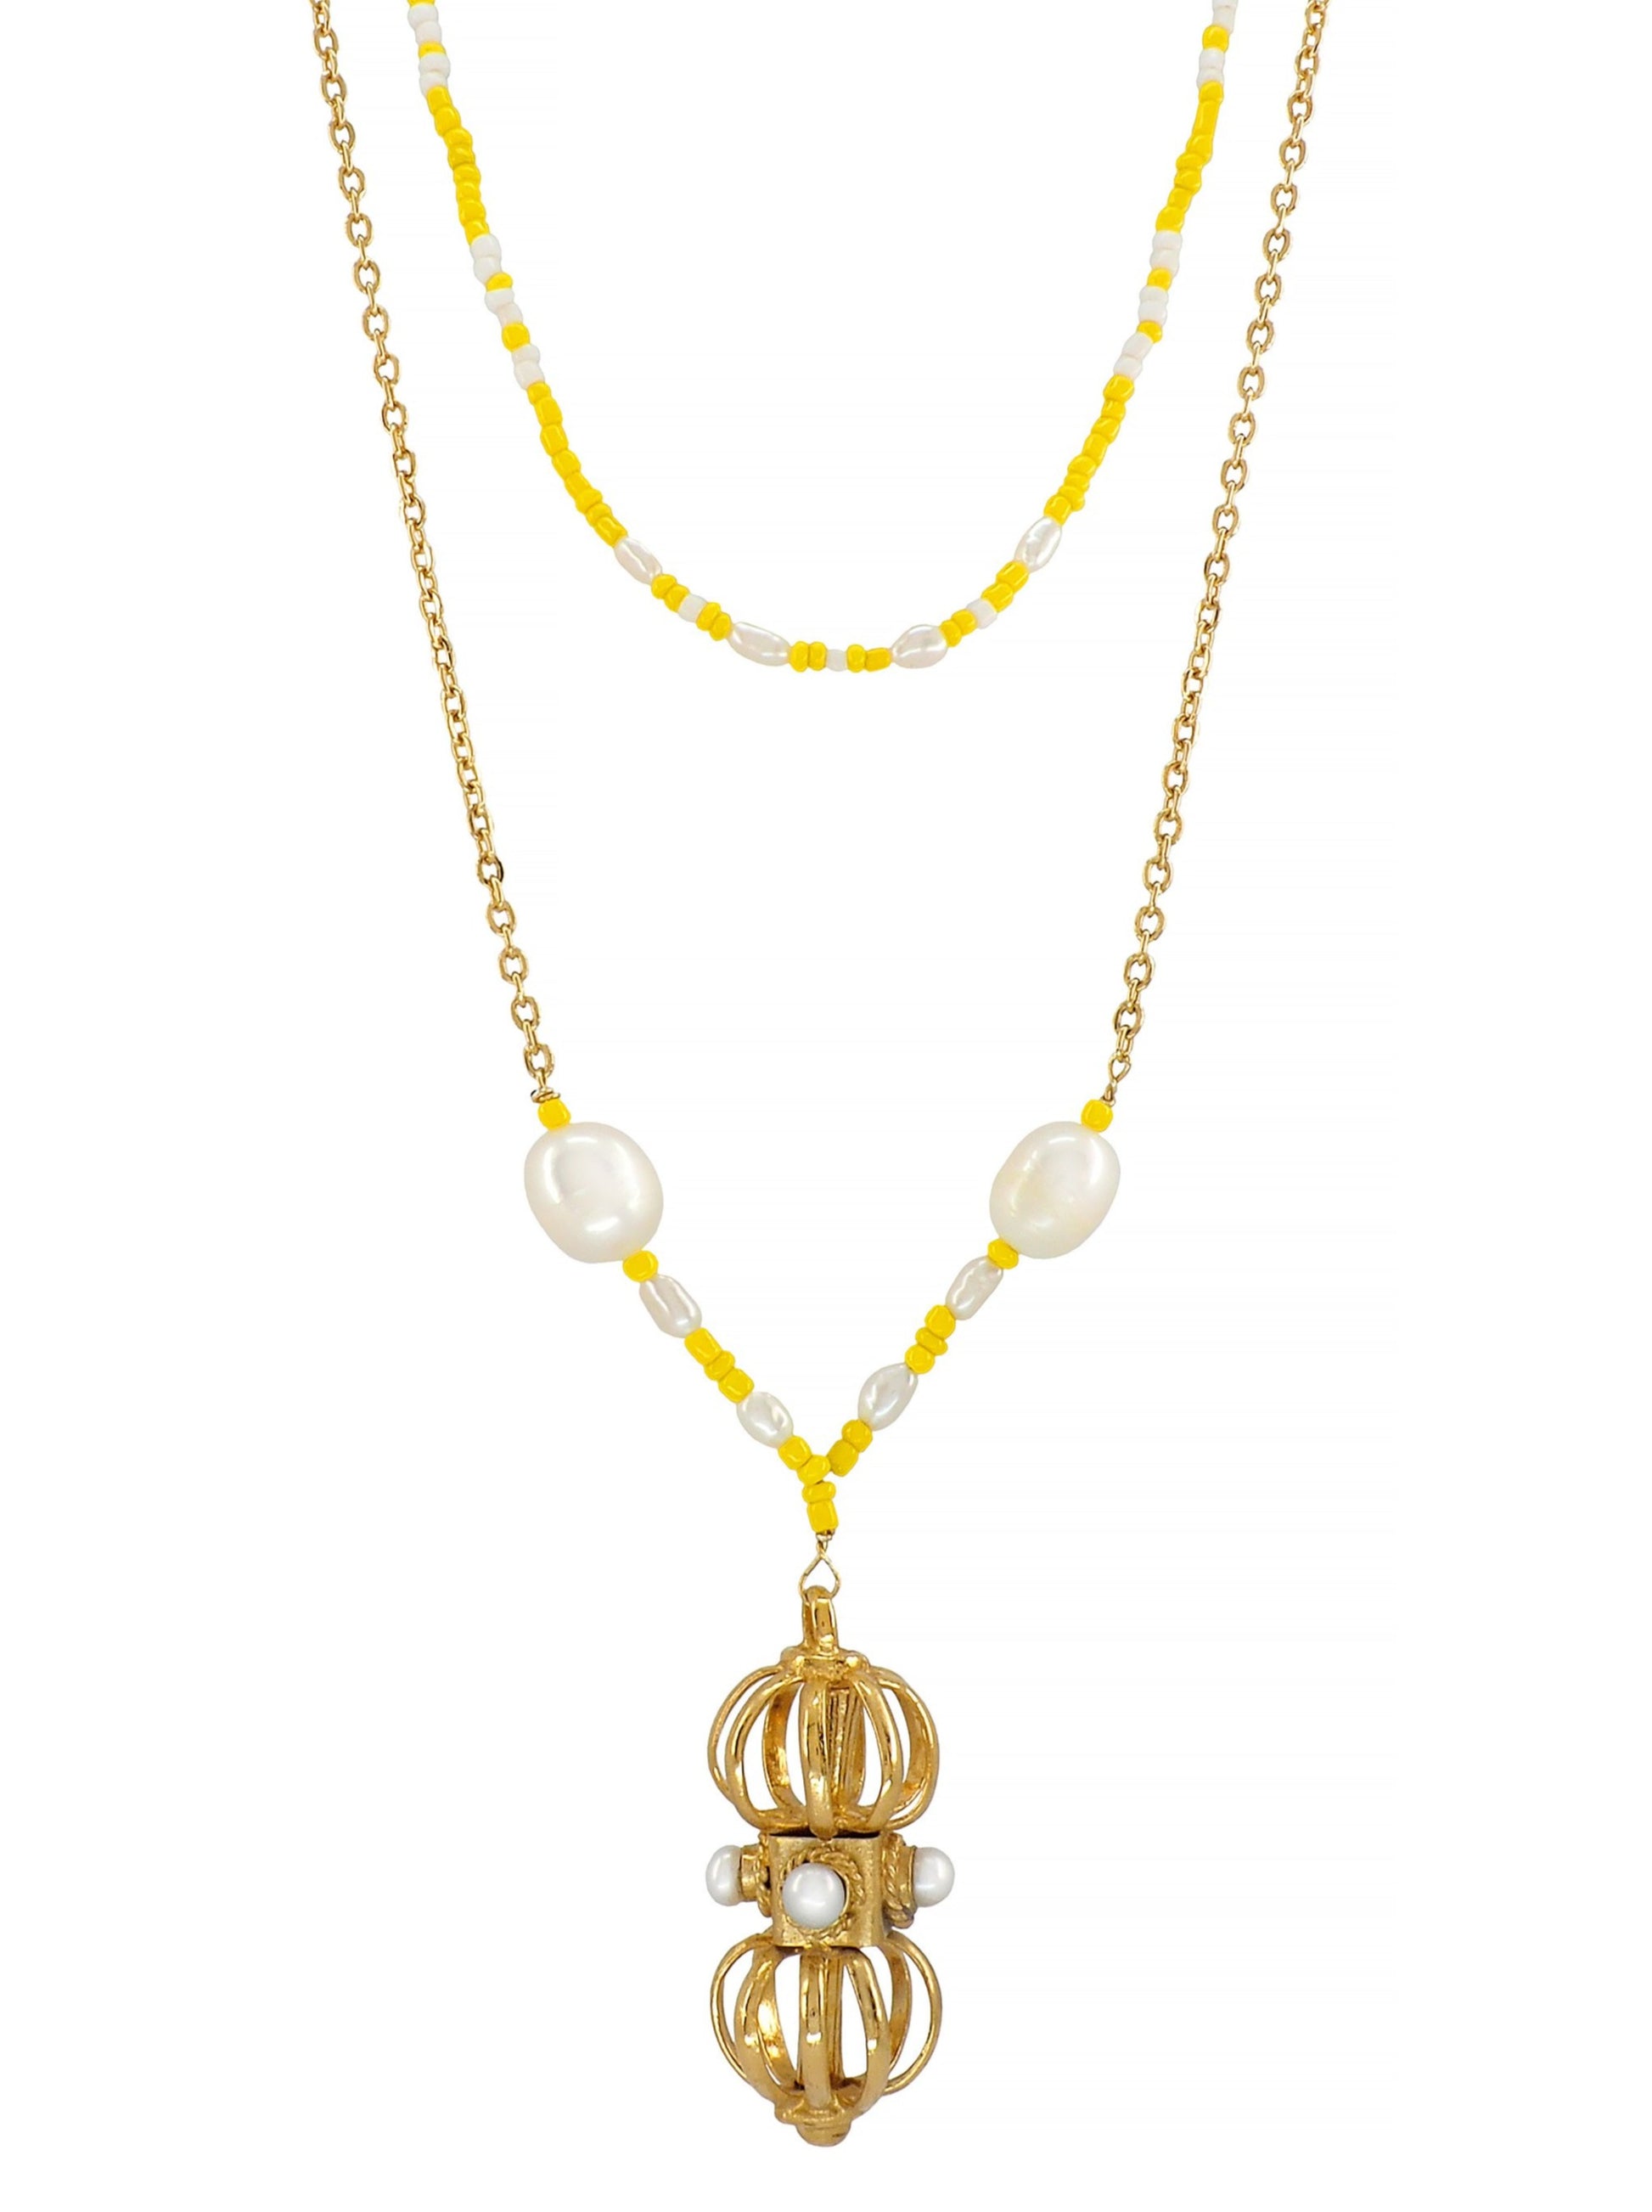 This beautiful Necklace is made with a gorgeous antique Dorje pendant bought in an old quaint little store in Thailand. 